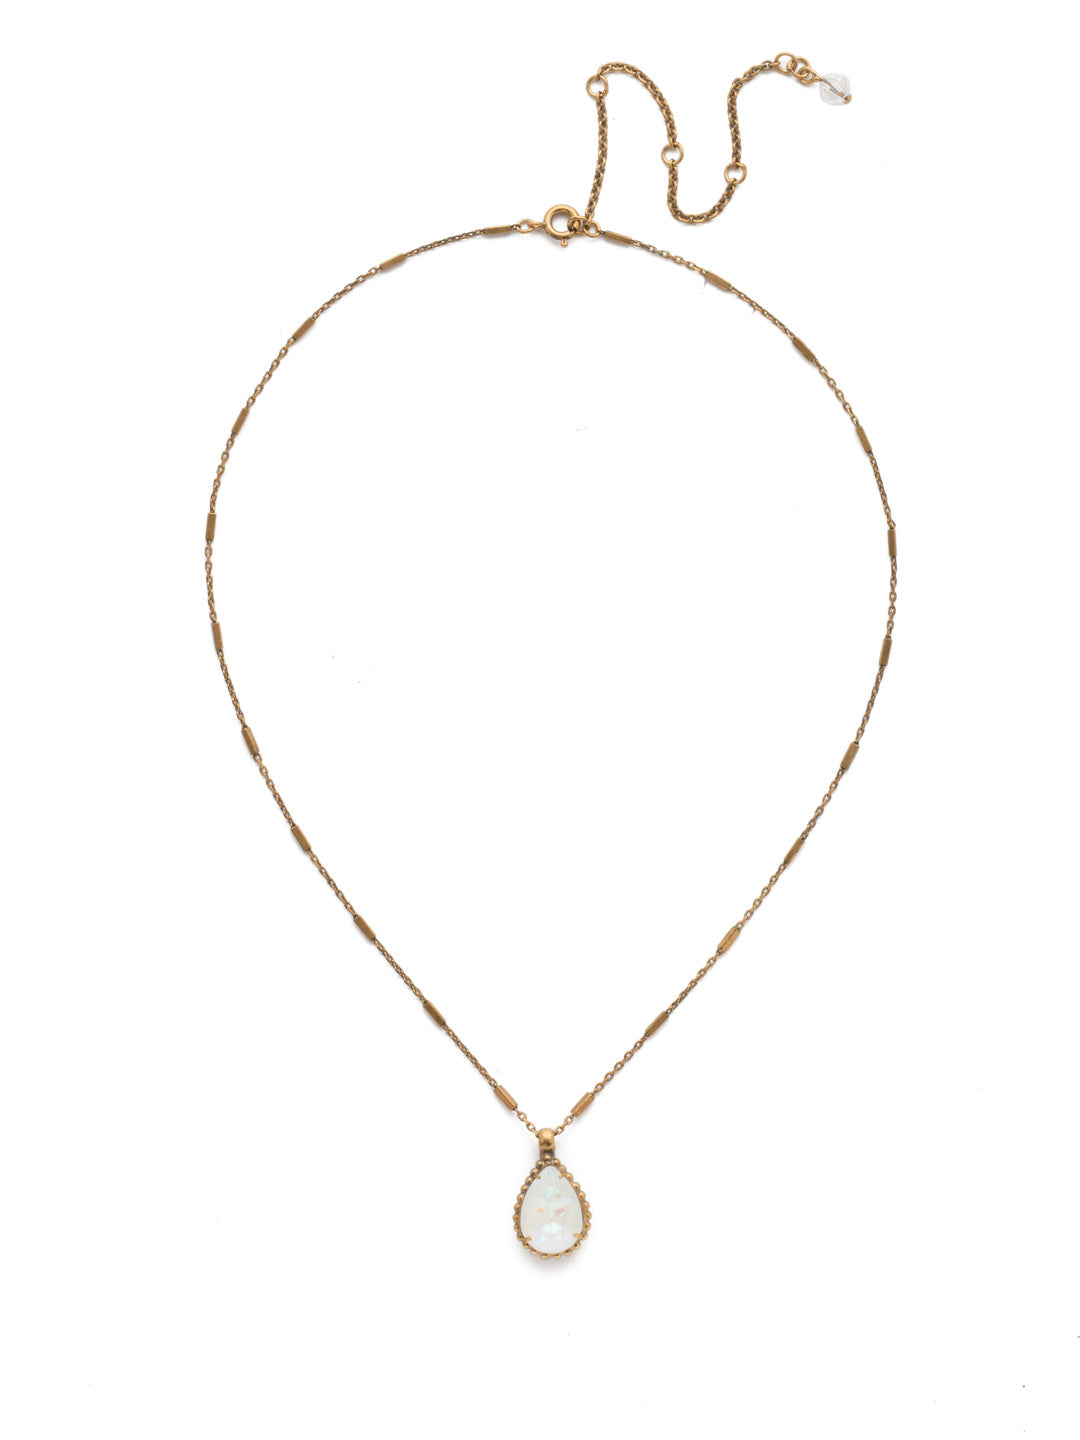 Simply Adorned Pendant Necklace - NDN12AGROB - A decorative chain and embellished setting highlight a central teardrop crystal. From Sorrelli's Rocky Beach collection in our Antique Gold-tone finish.